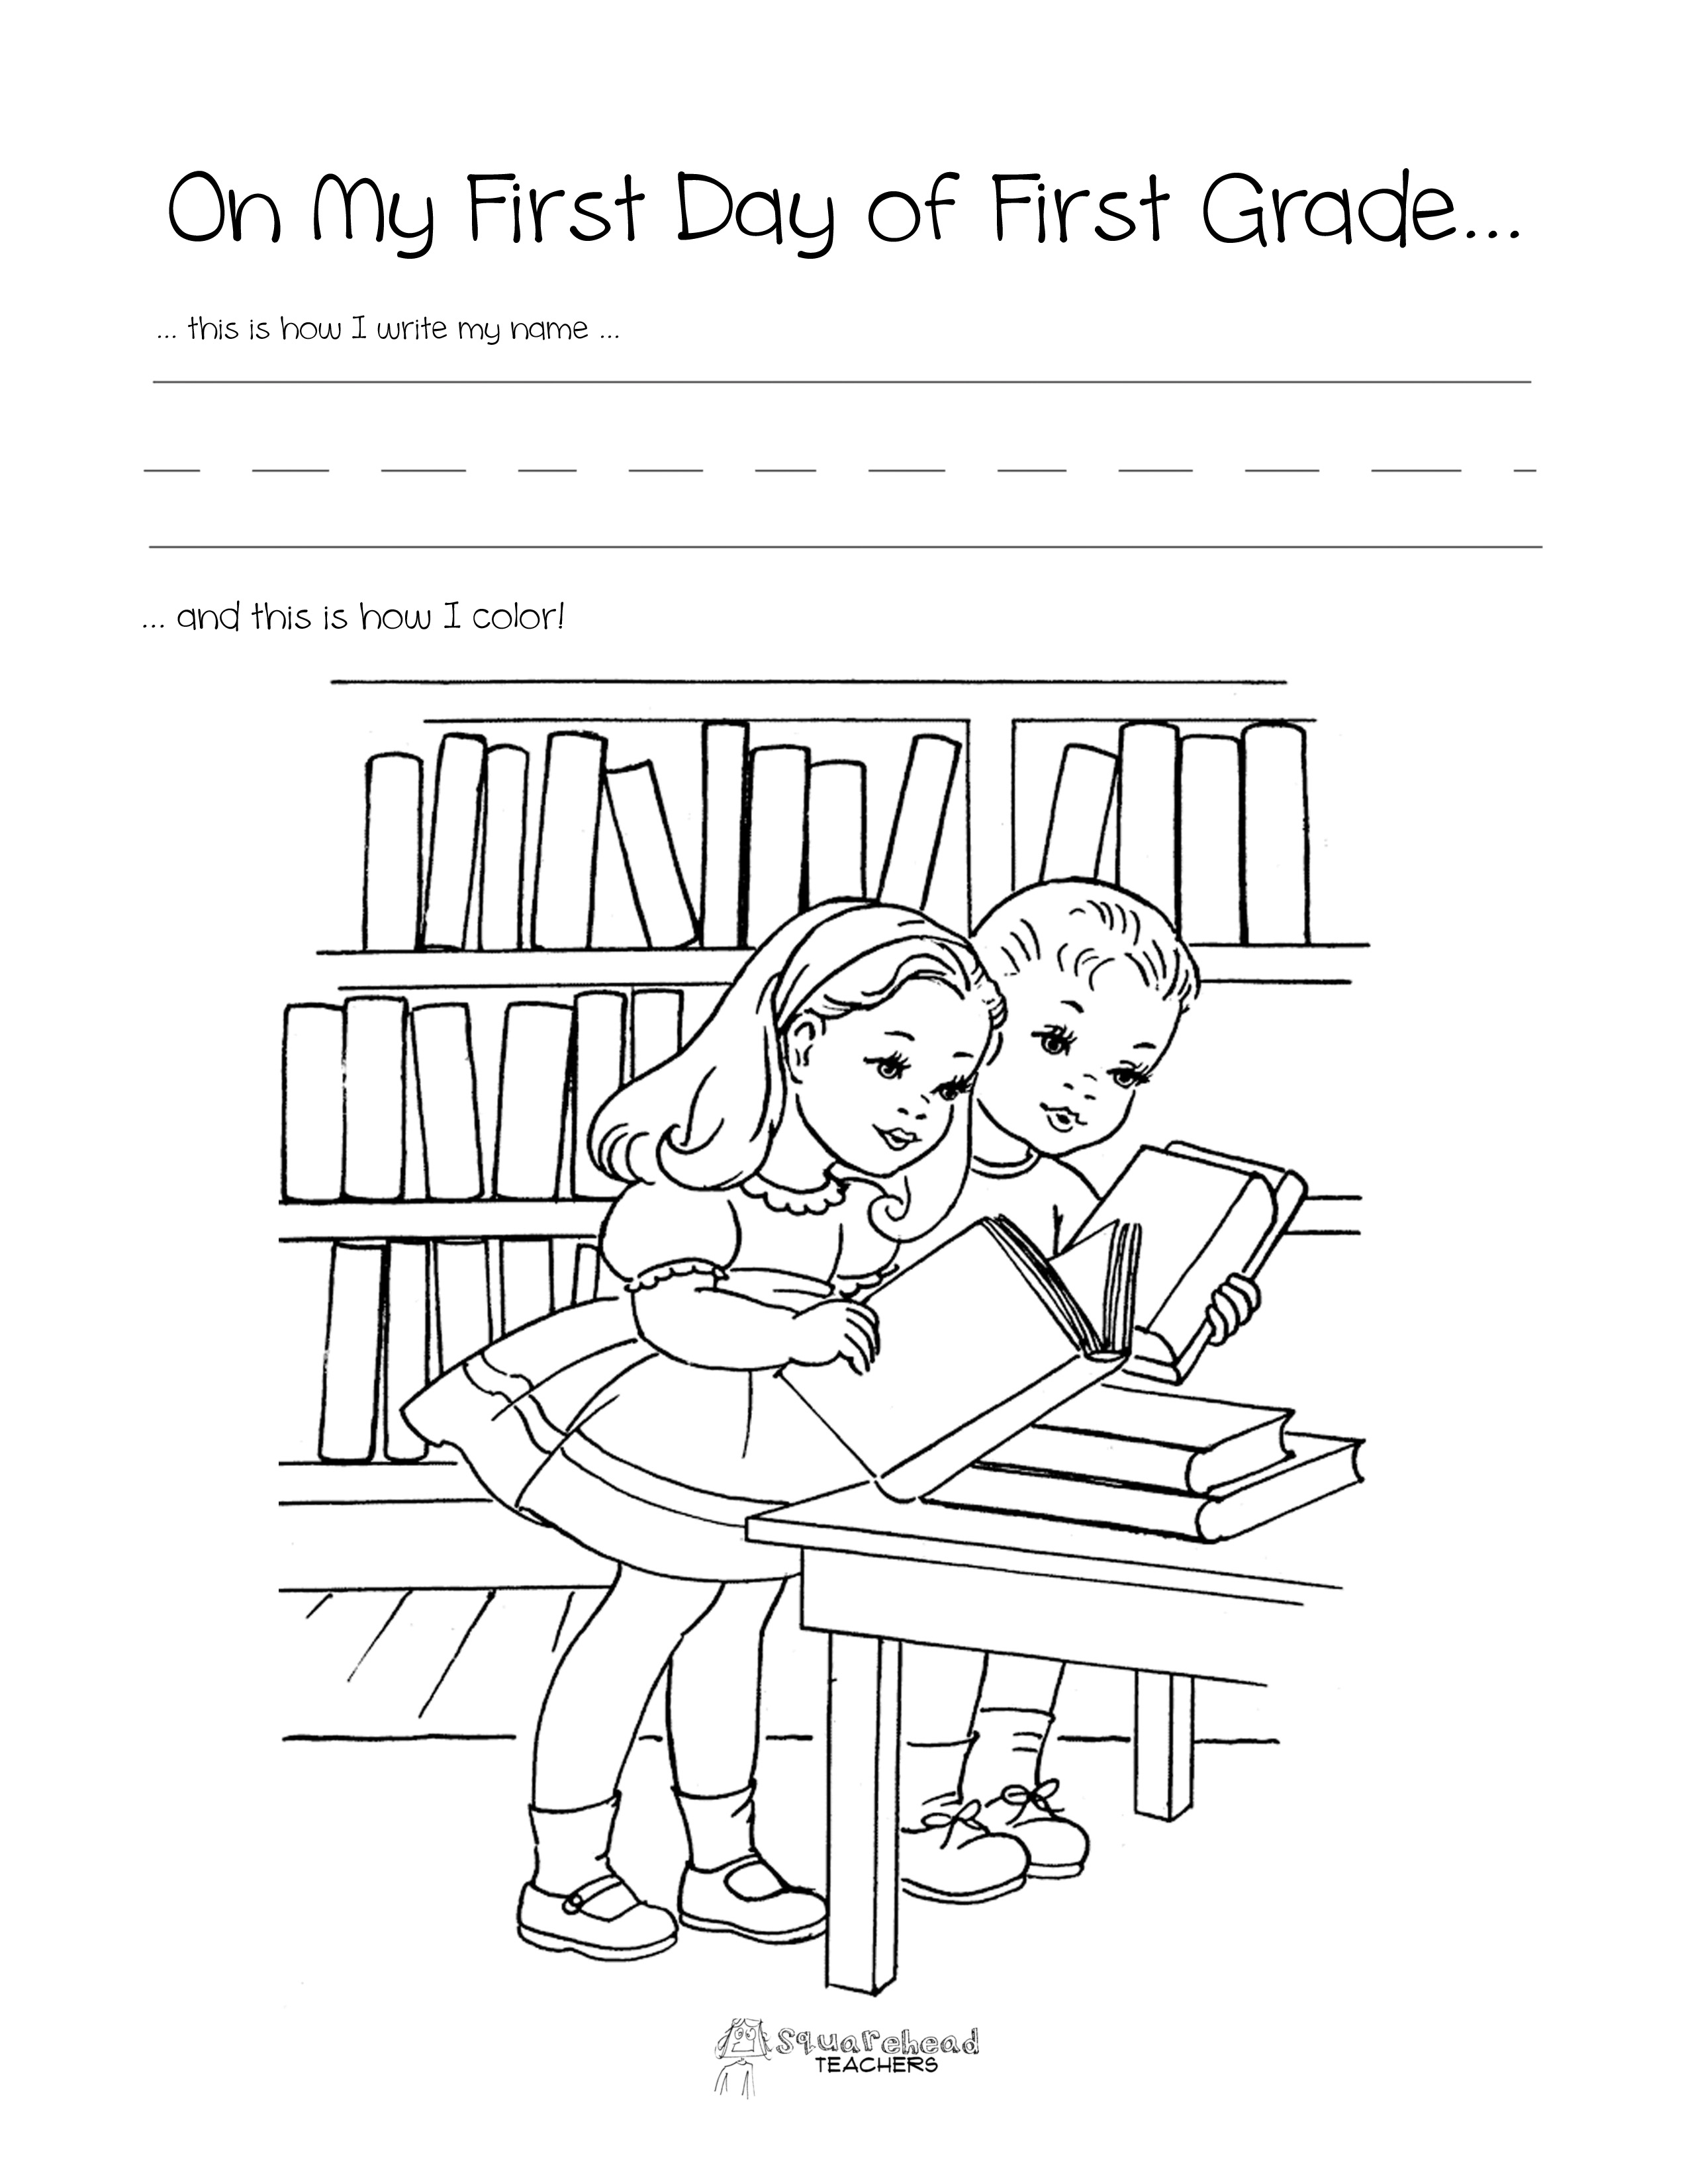 First Day of School Worksheets 1st Grade